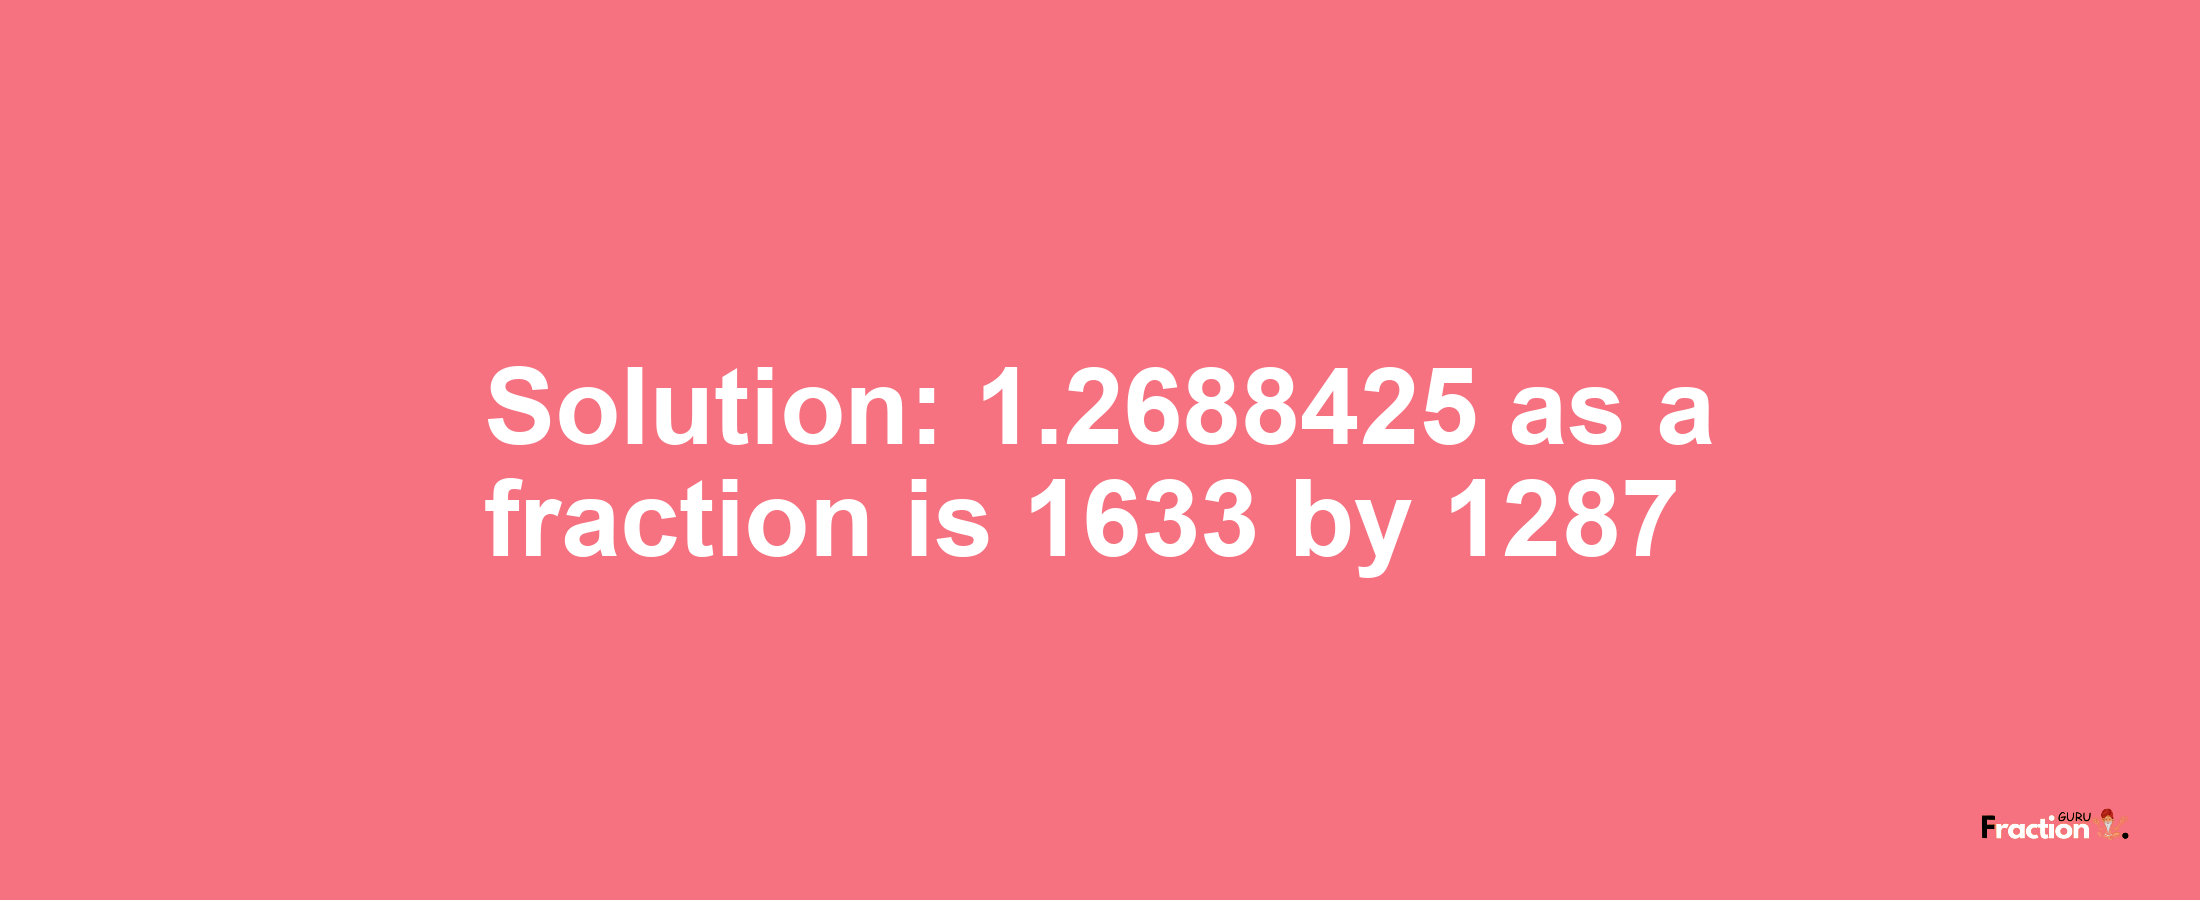 Solution:1.2688425 as a fraction is 1633/1287